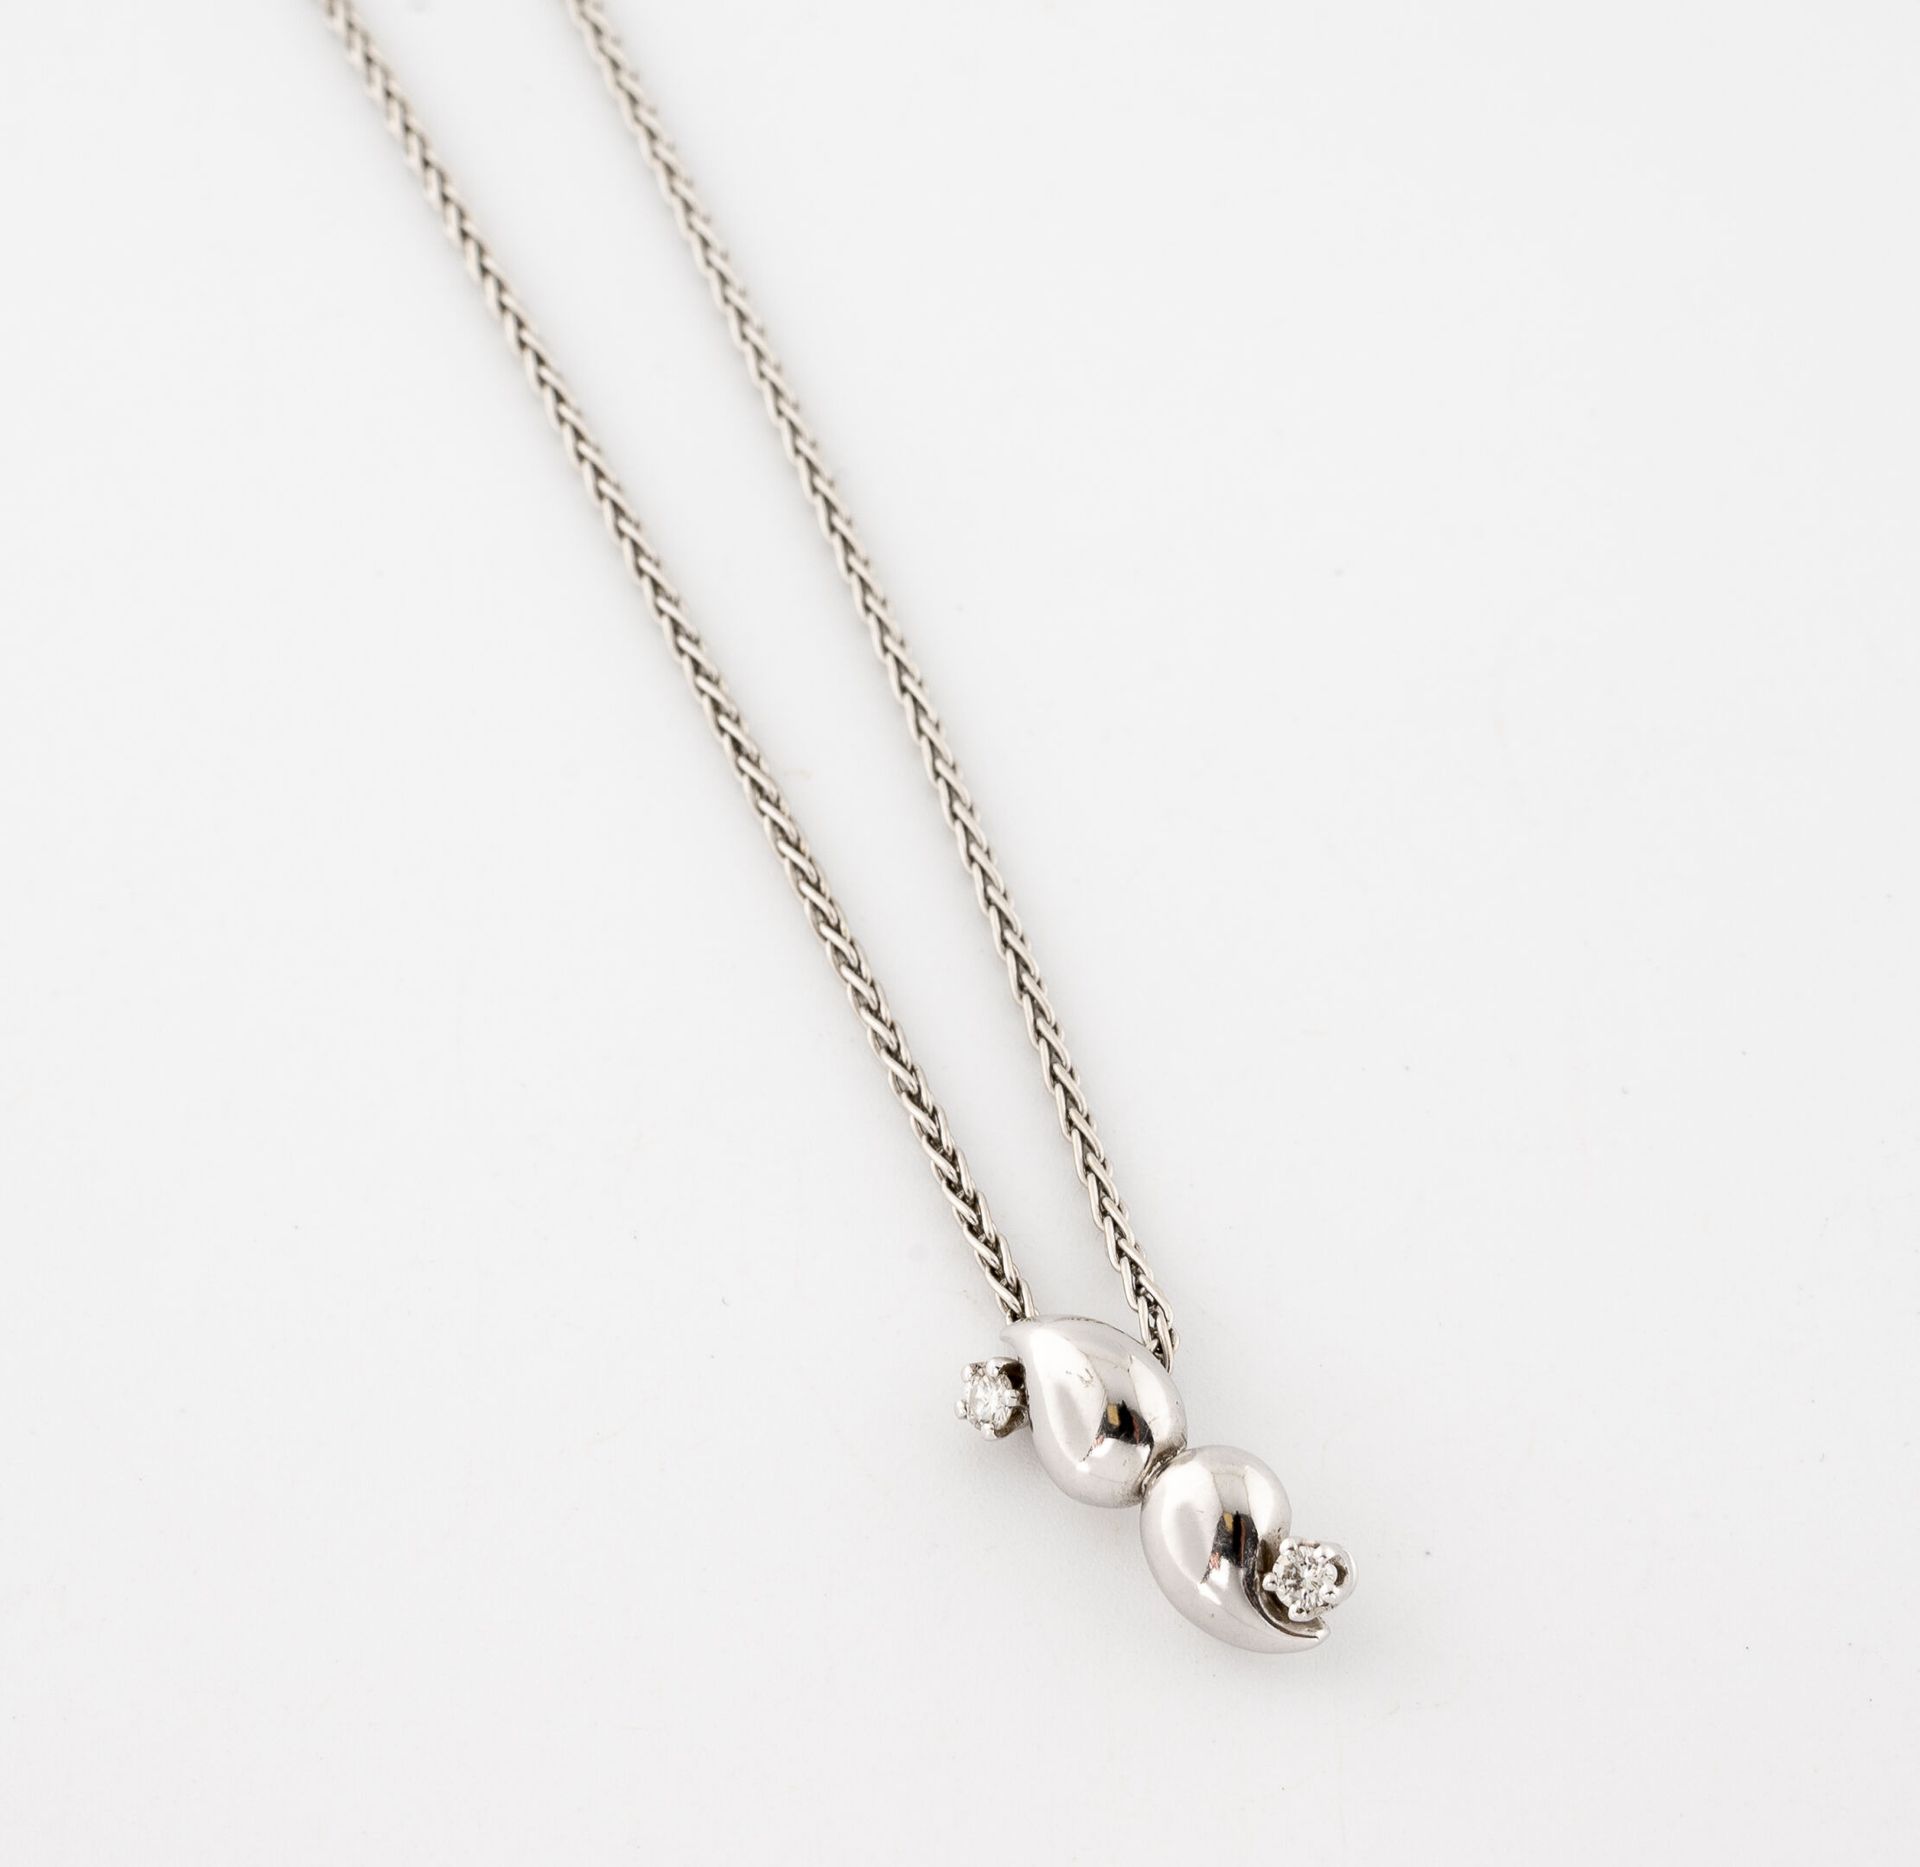 Null Necklace with braided chain and its pendant in white gold (750), the latter&hellip;